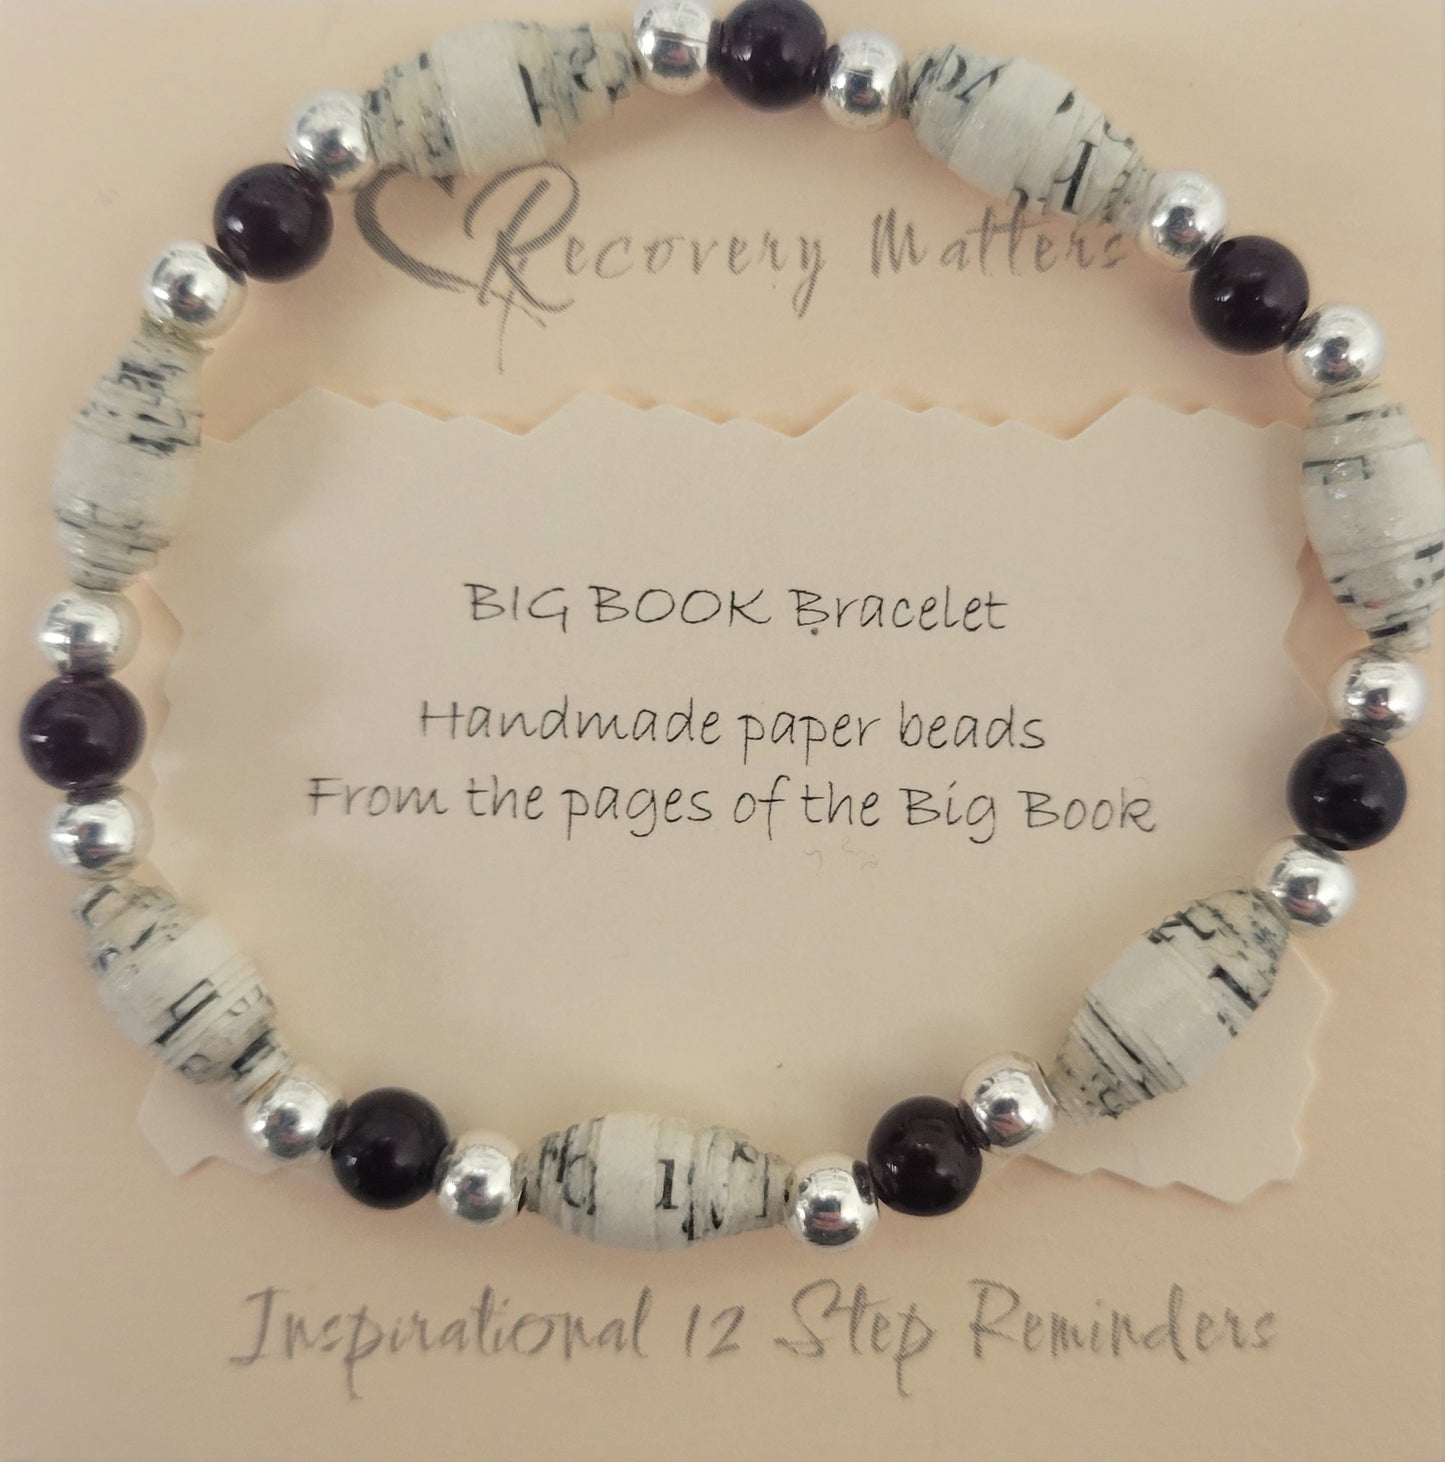 Big Book Bracelets By Recovery Matters (Natural Stone) - Made From Pages Of The Big Book